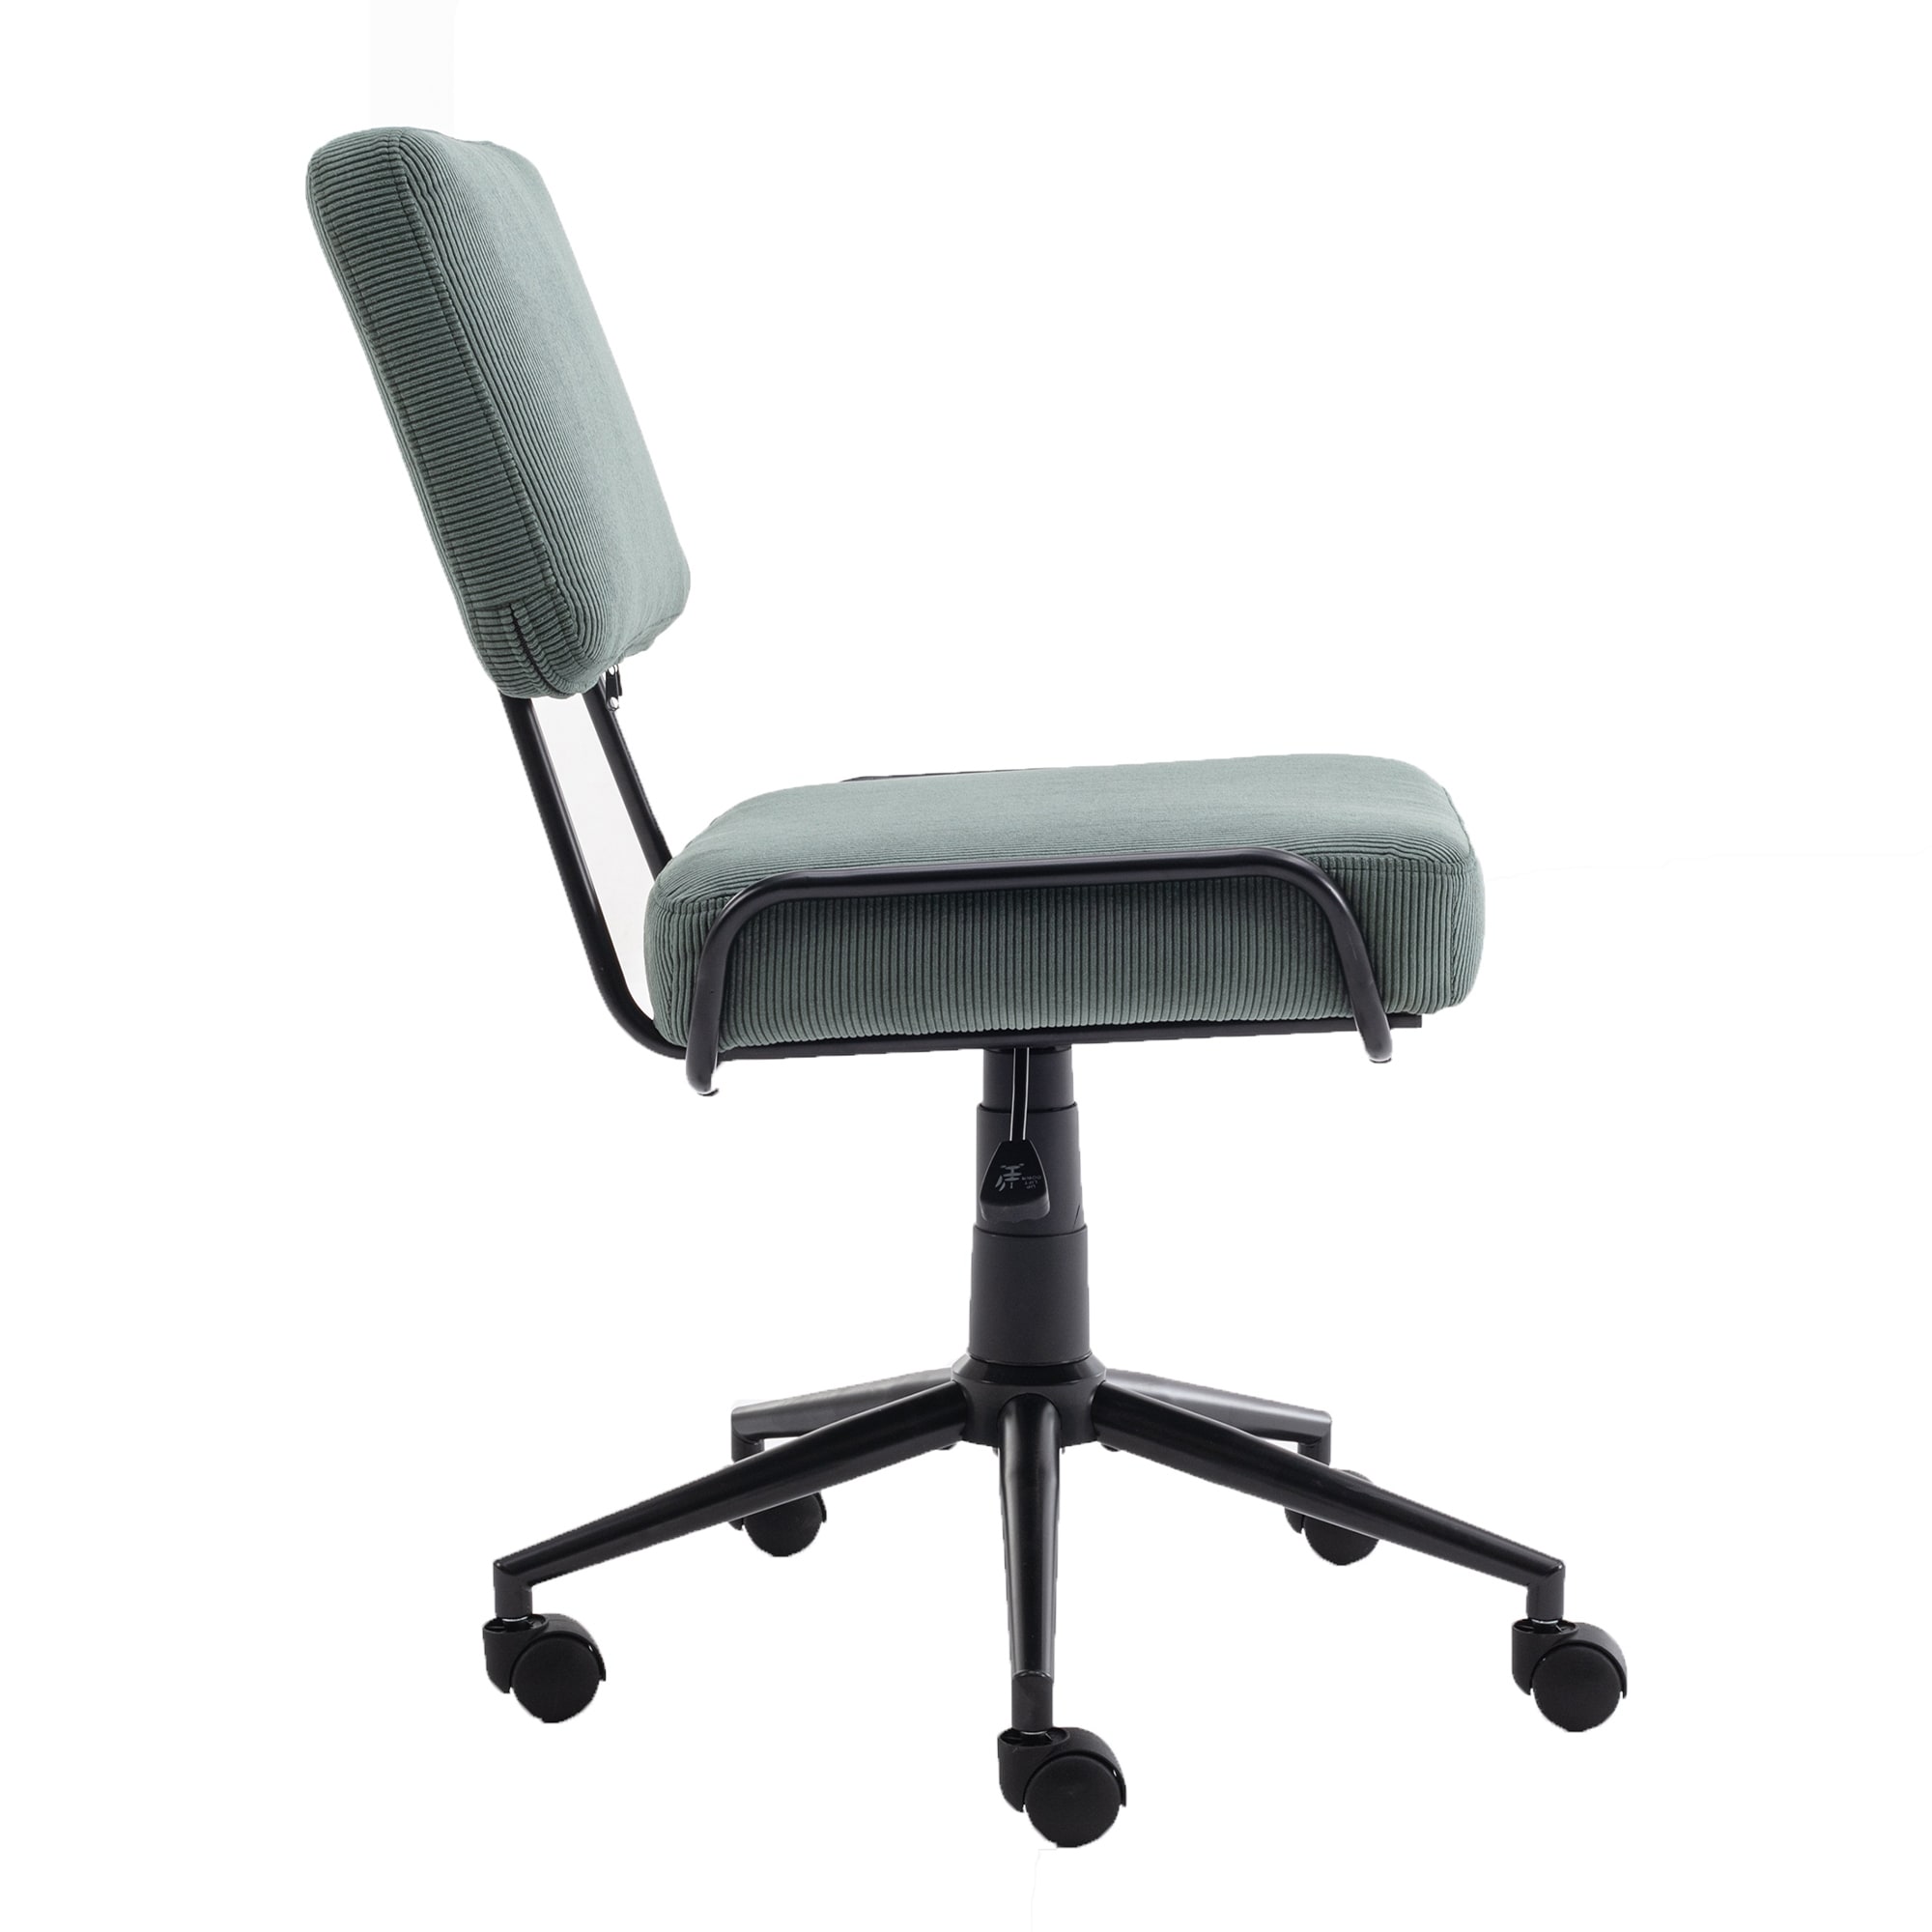 Swivel Rolling Office Chair with Wheels - Bed Bath & Beyond - 39486749